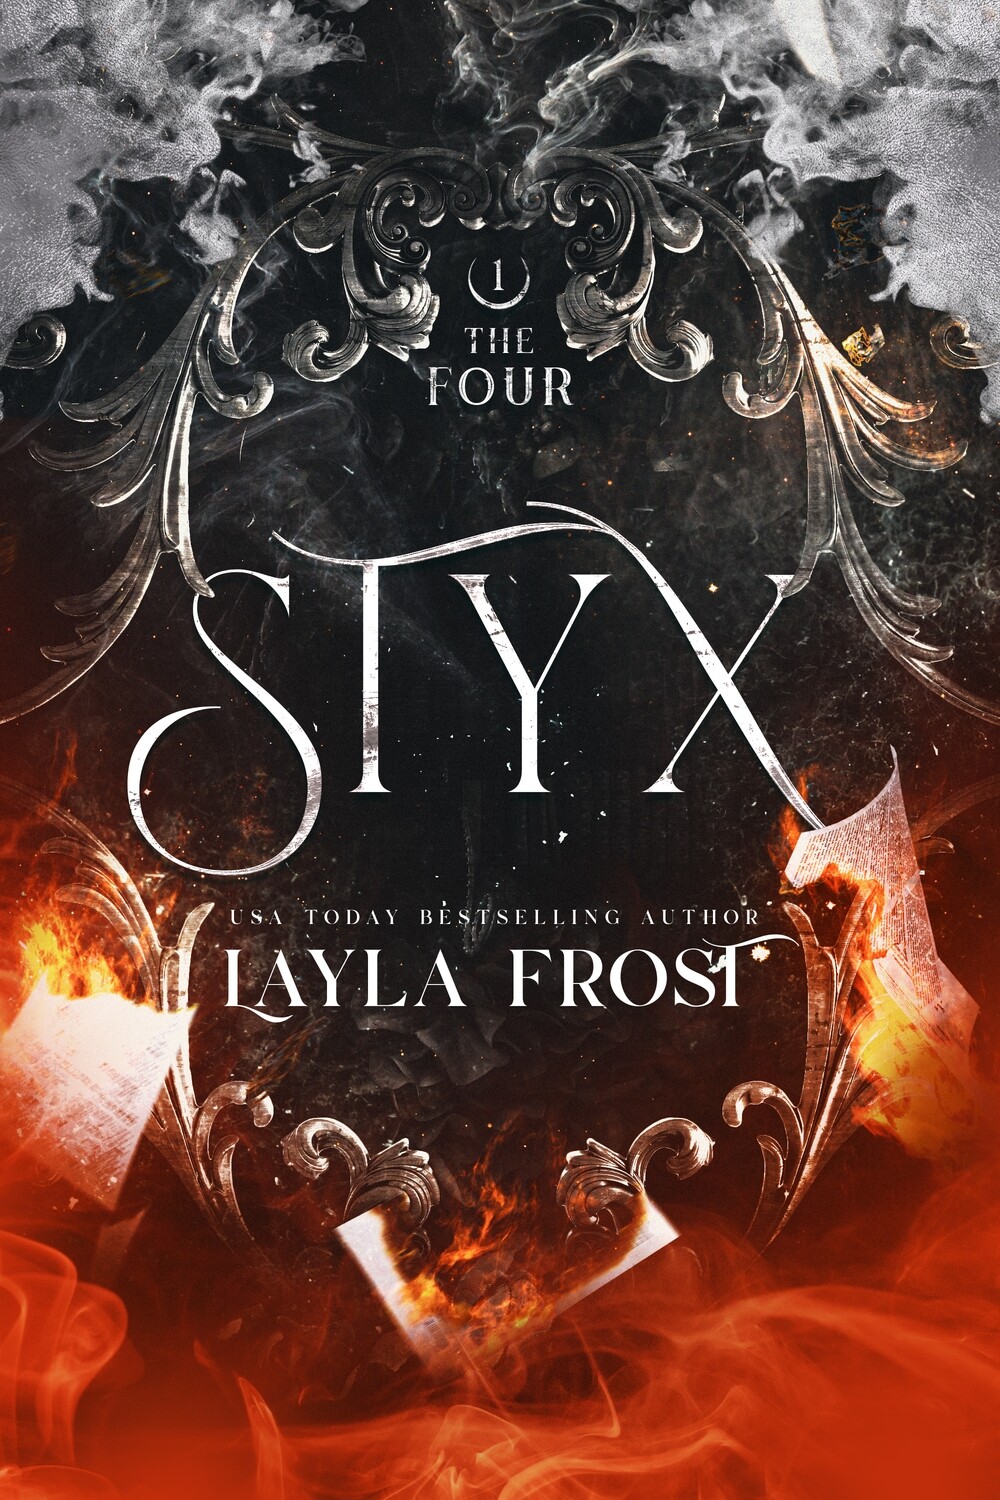 Styx (The Four Series book 1) Paperback